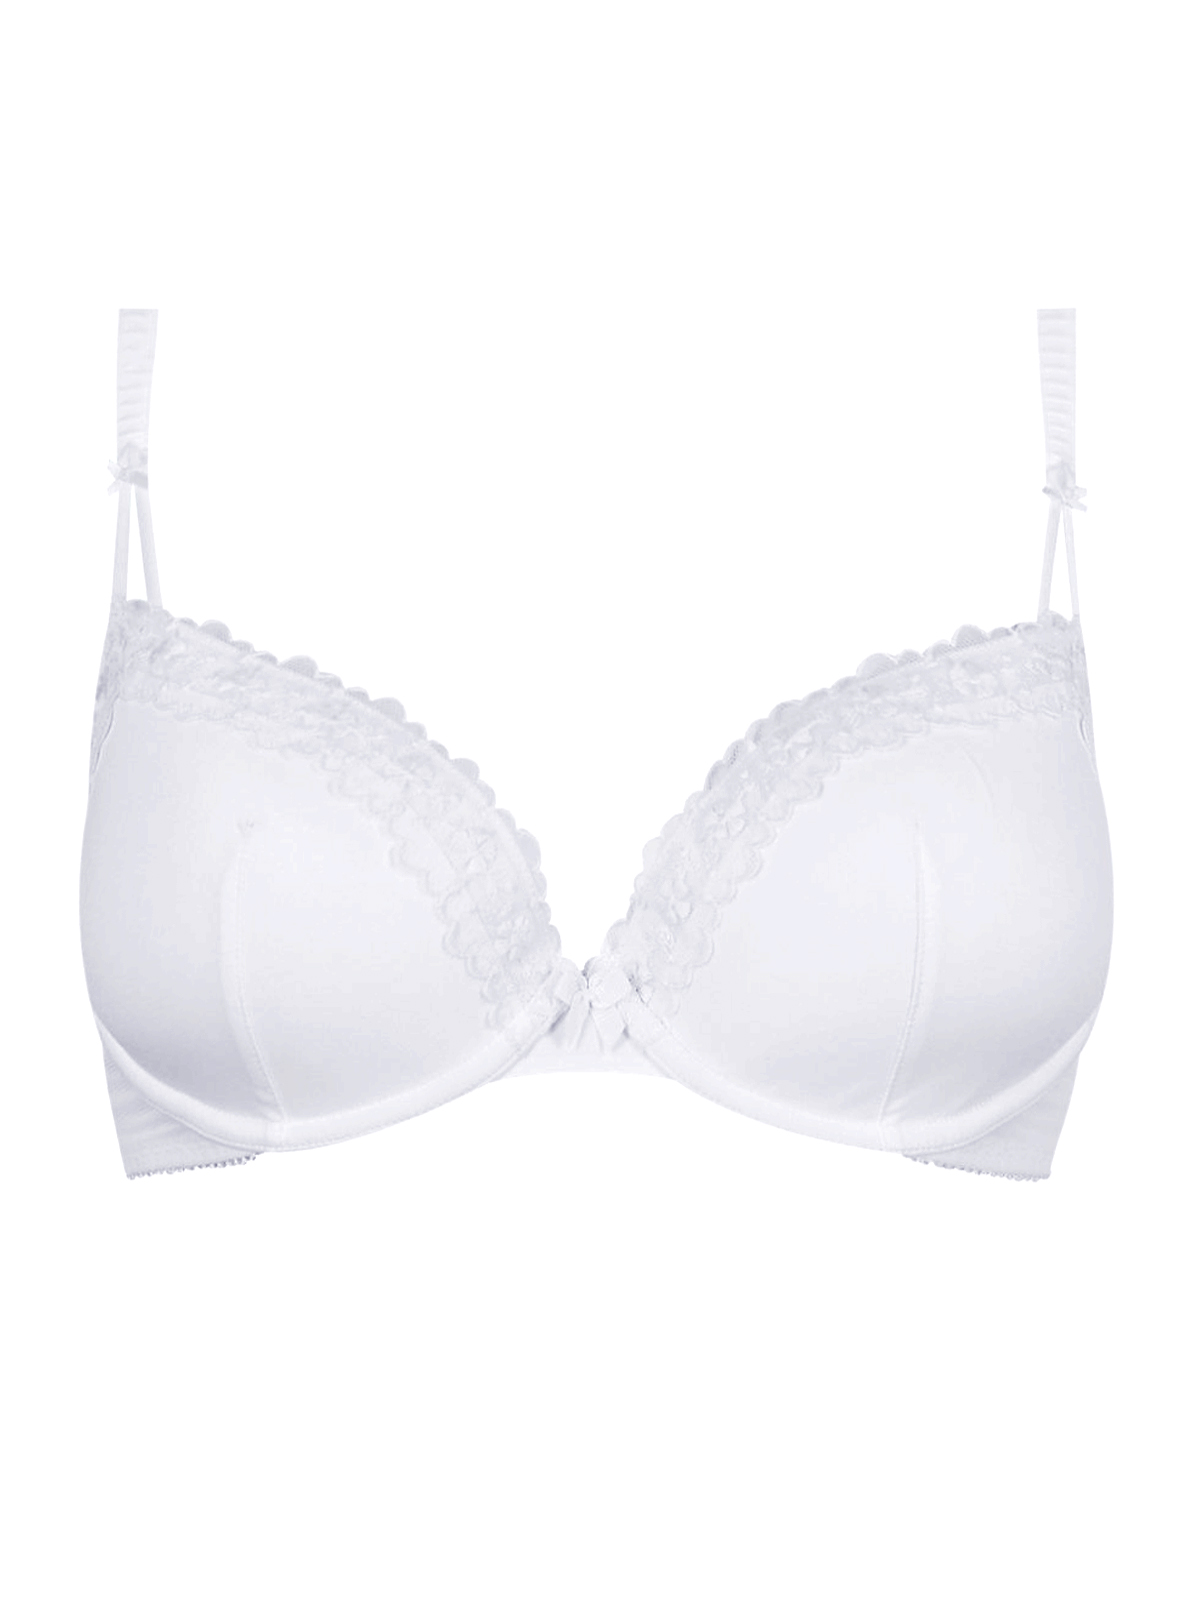 Marks and Spencer - - M&5 WHITE Embroidered Padded Plunge Bra - Size 34 ...